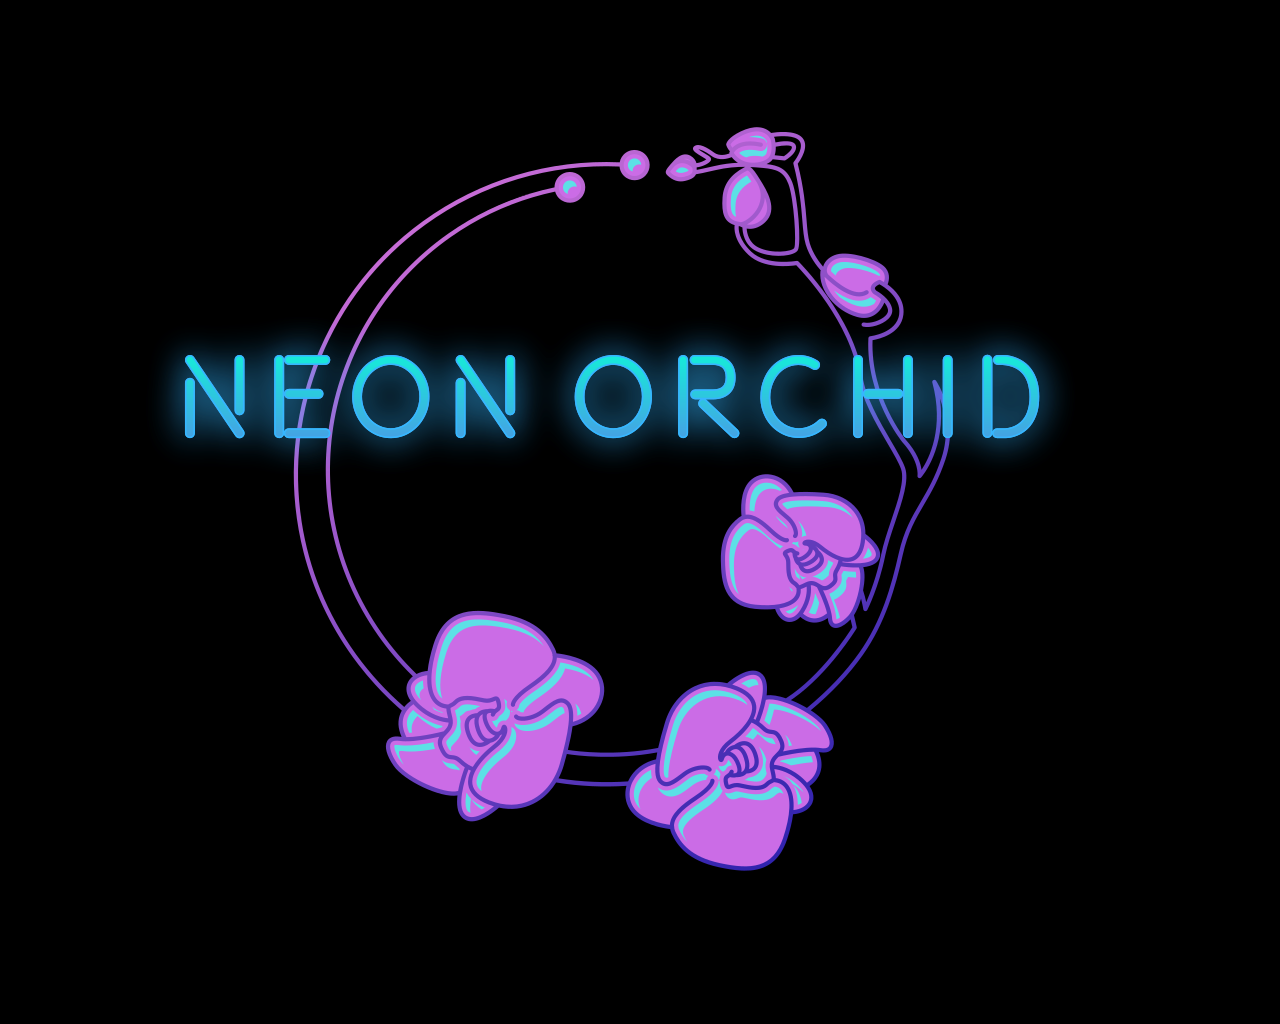 The Neon Orchid - Fashion At Your Fingertips